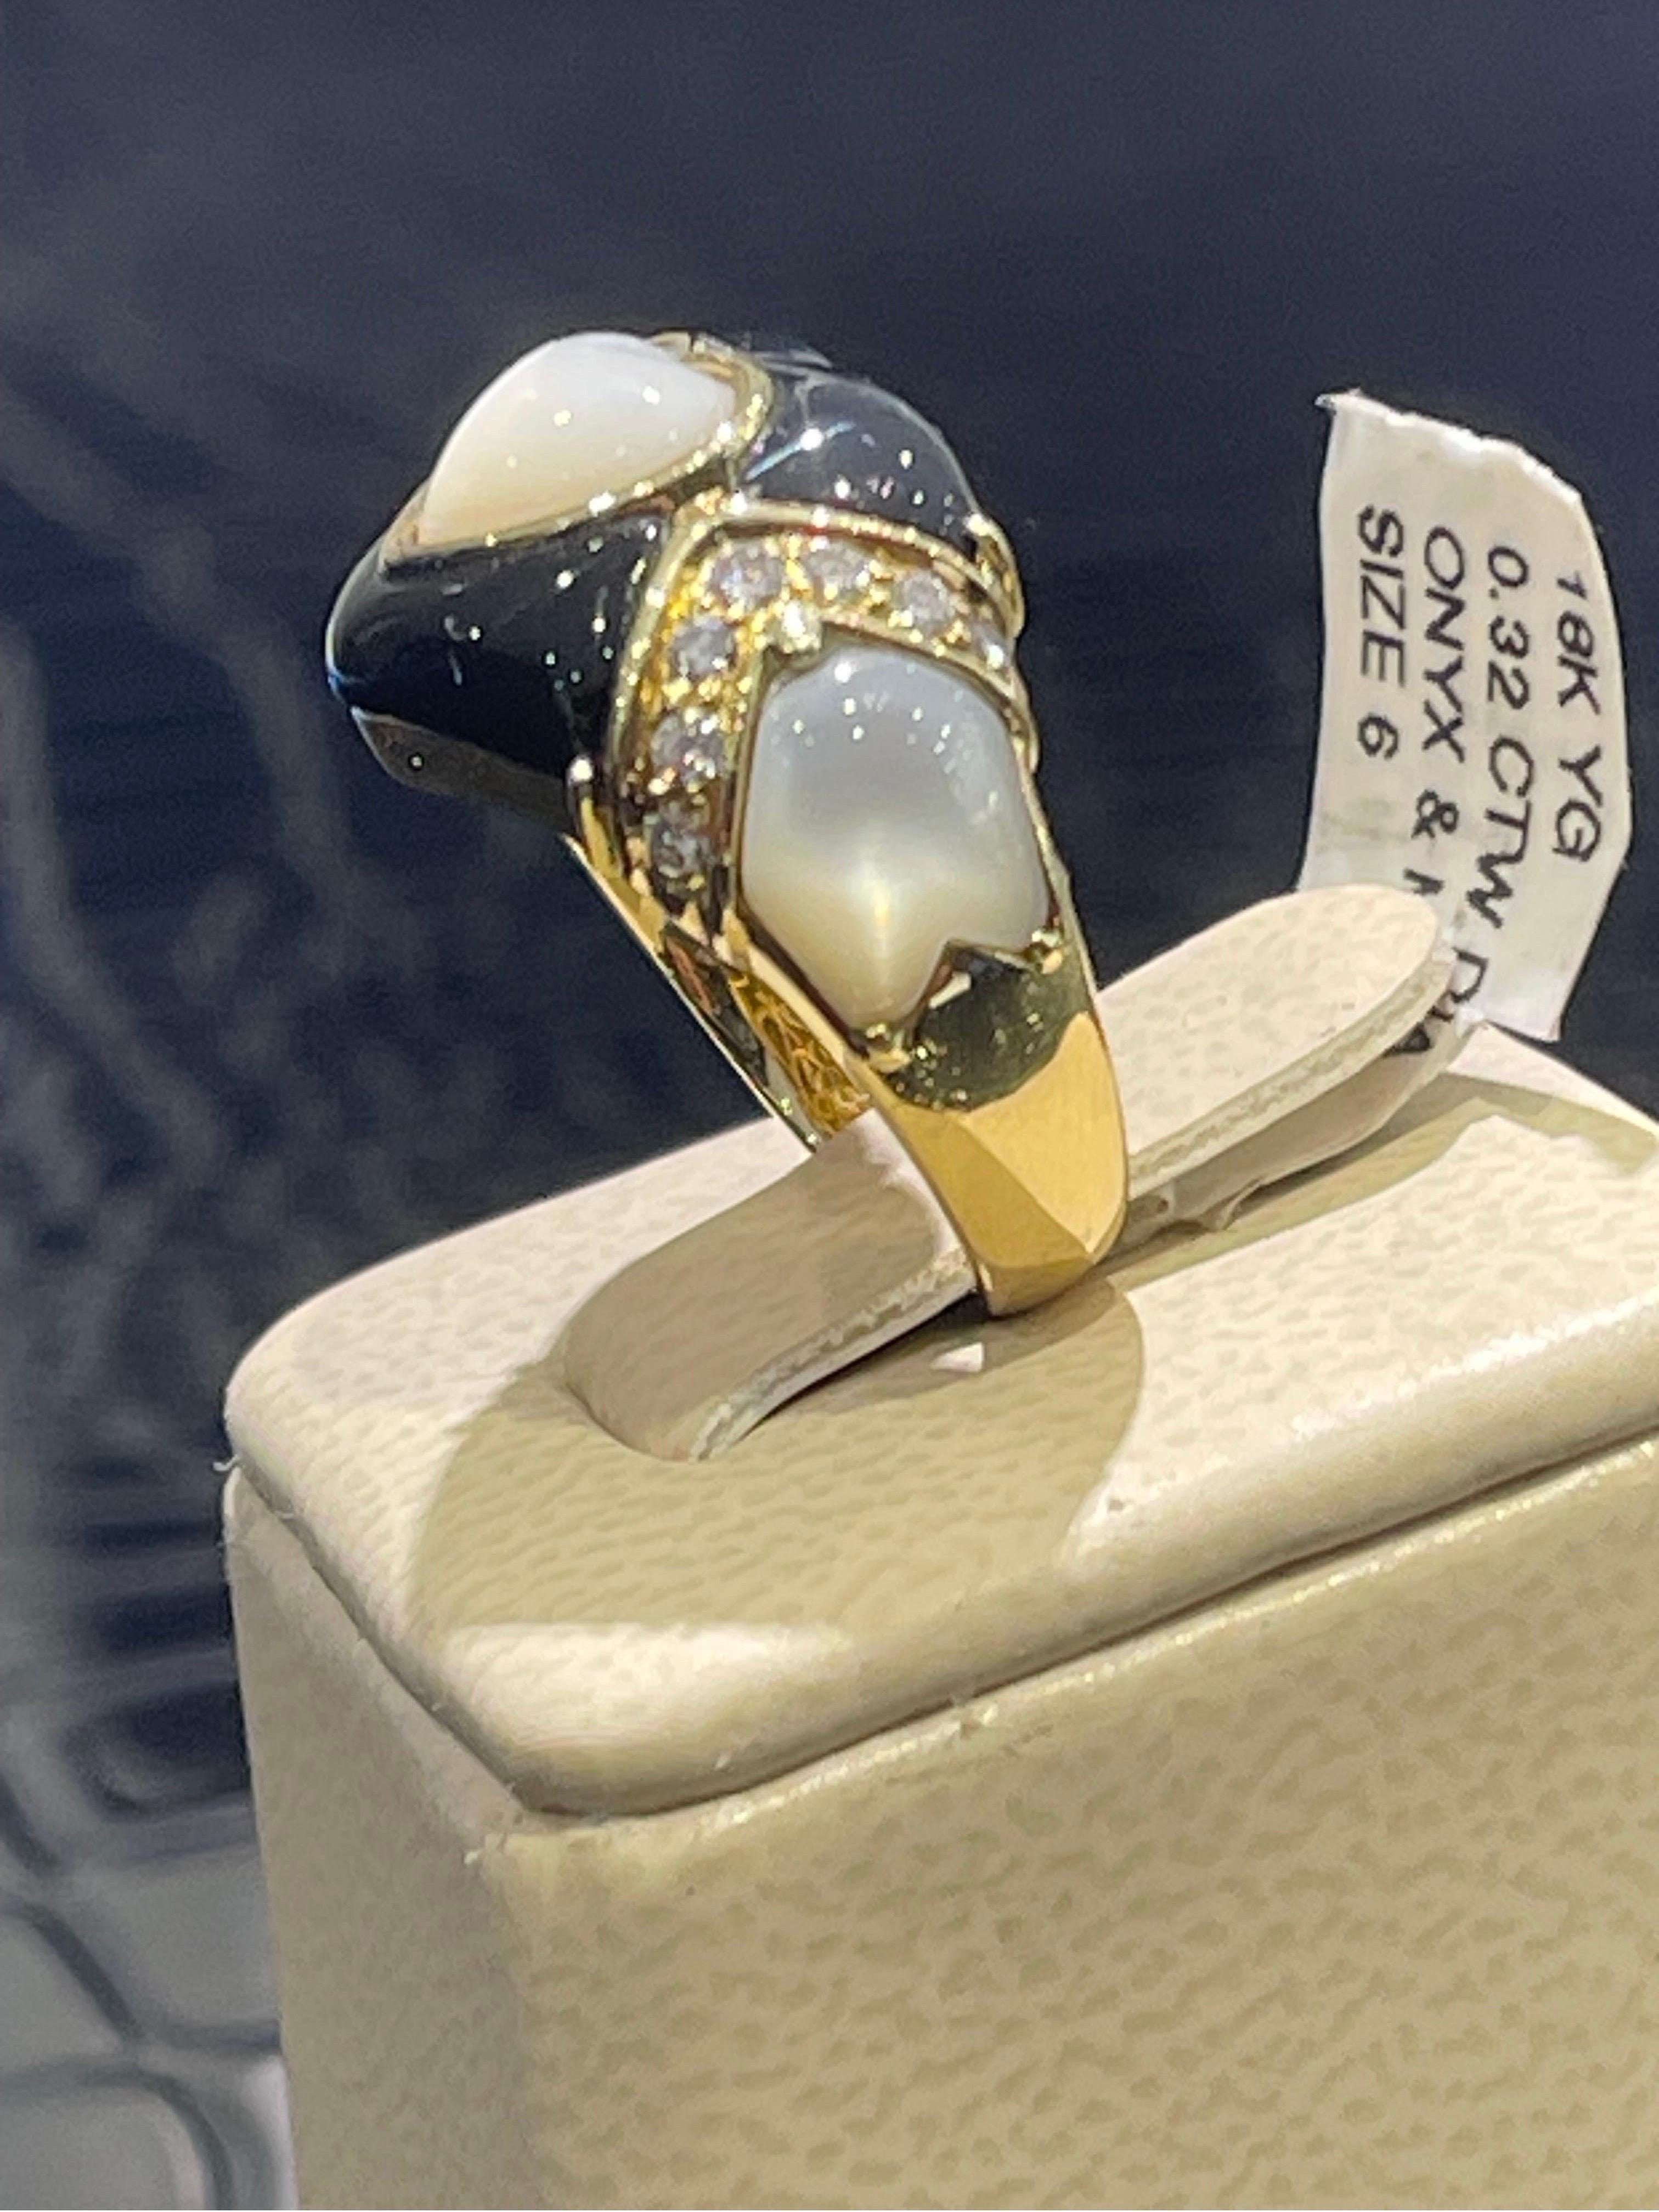 Stunning Onyx, Mother Of Pearl And Diamond Heart Ring In 18k In New Condition For Sale In Fort Lauderdale, FL